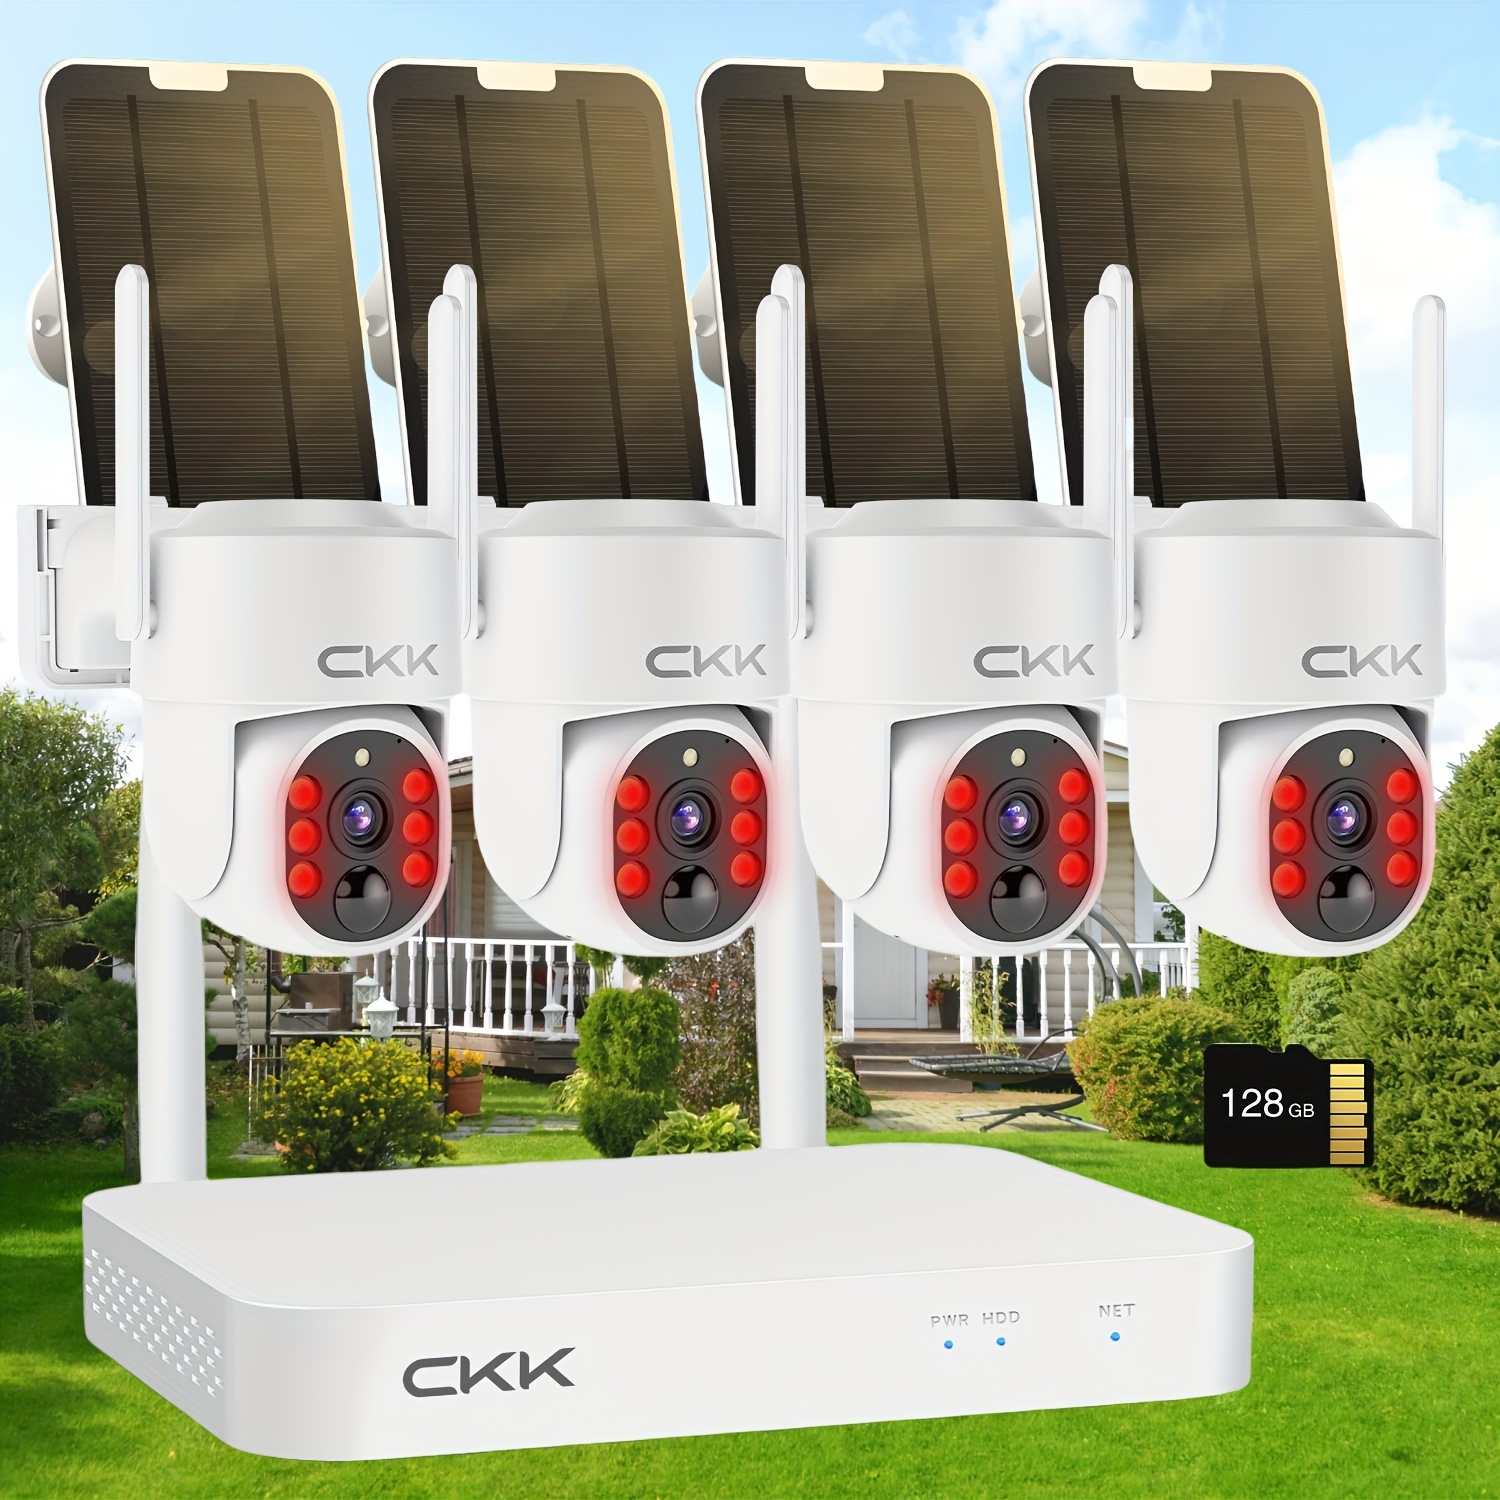 

4mp Solar Camera Wireless Outdoor, 4 Cameras Wireless Nvr System For Home Security, 2.4g Wifi, 6led Floodlight, 128g Local Storage, 360° View, 2.5k Color Night Vision, Pan/tilt, Two-way Audio